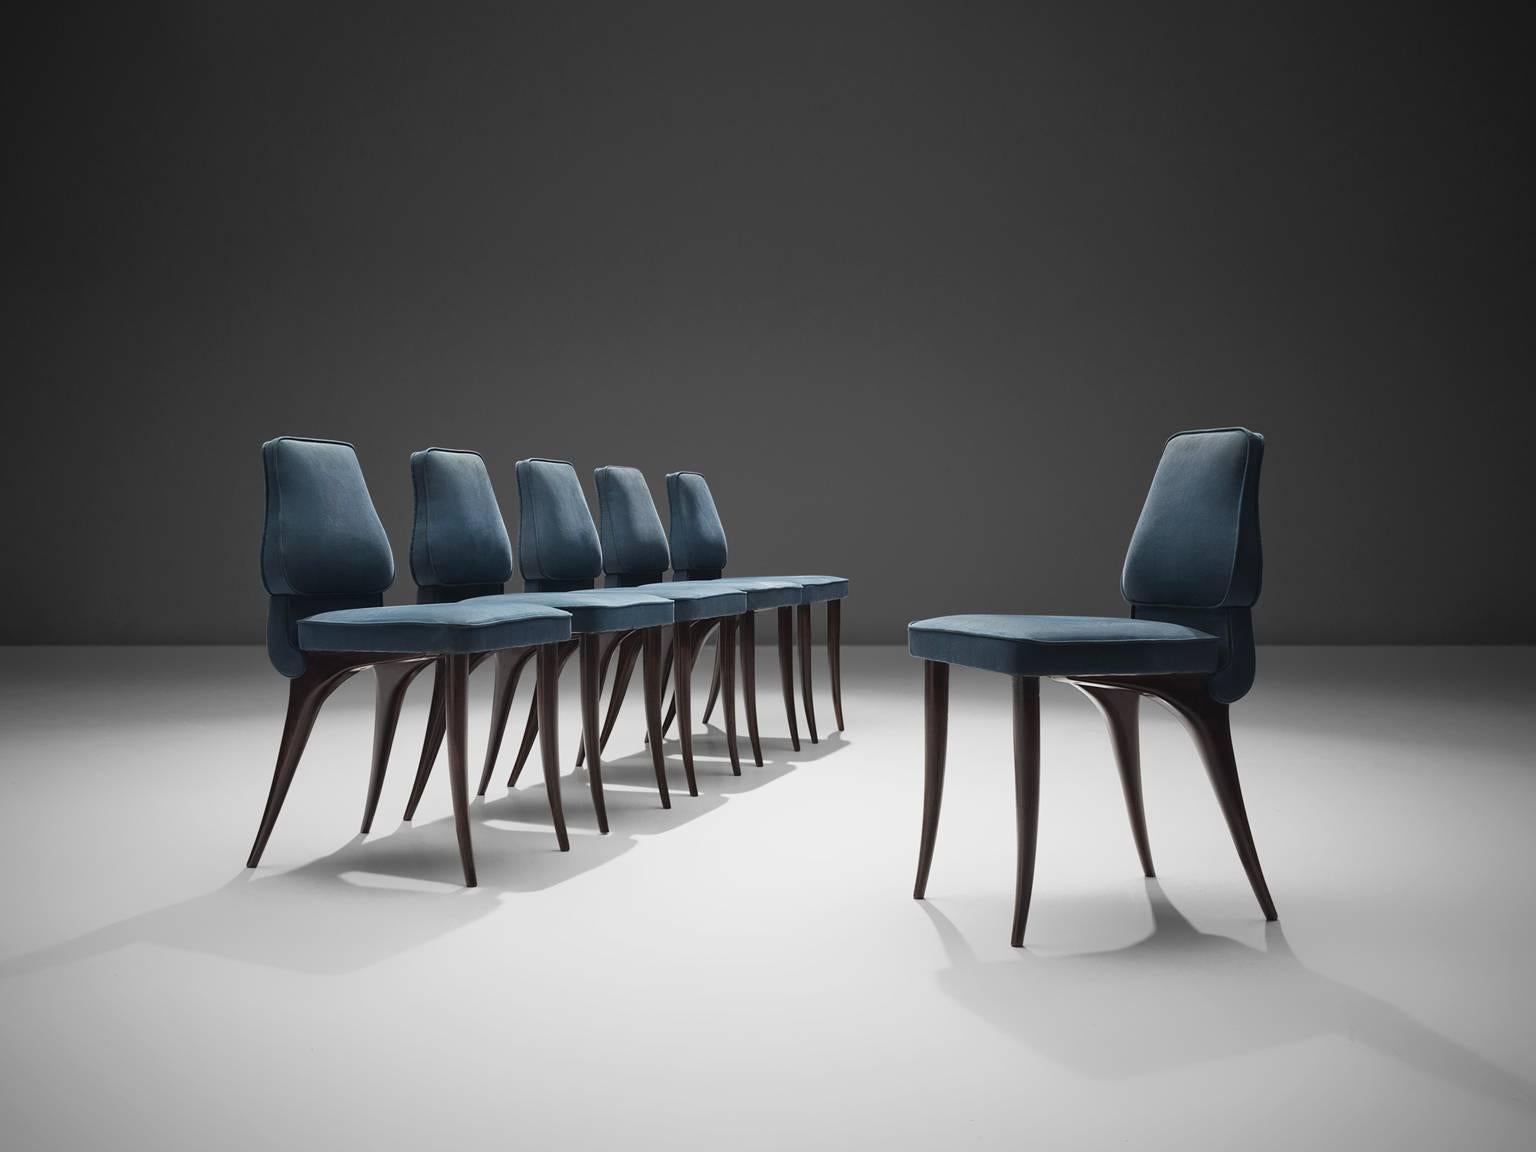 Aldo Morbelli for Colli, set of six dining chairs with blue fabric lining and mahogany legs, Italy, 1960s. 

These frivolous chairs have square seats and freeform shaped backs. They are elegant chairs with low backs that feature a beautiful